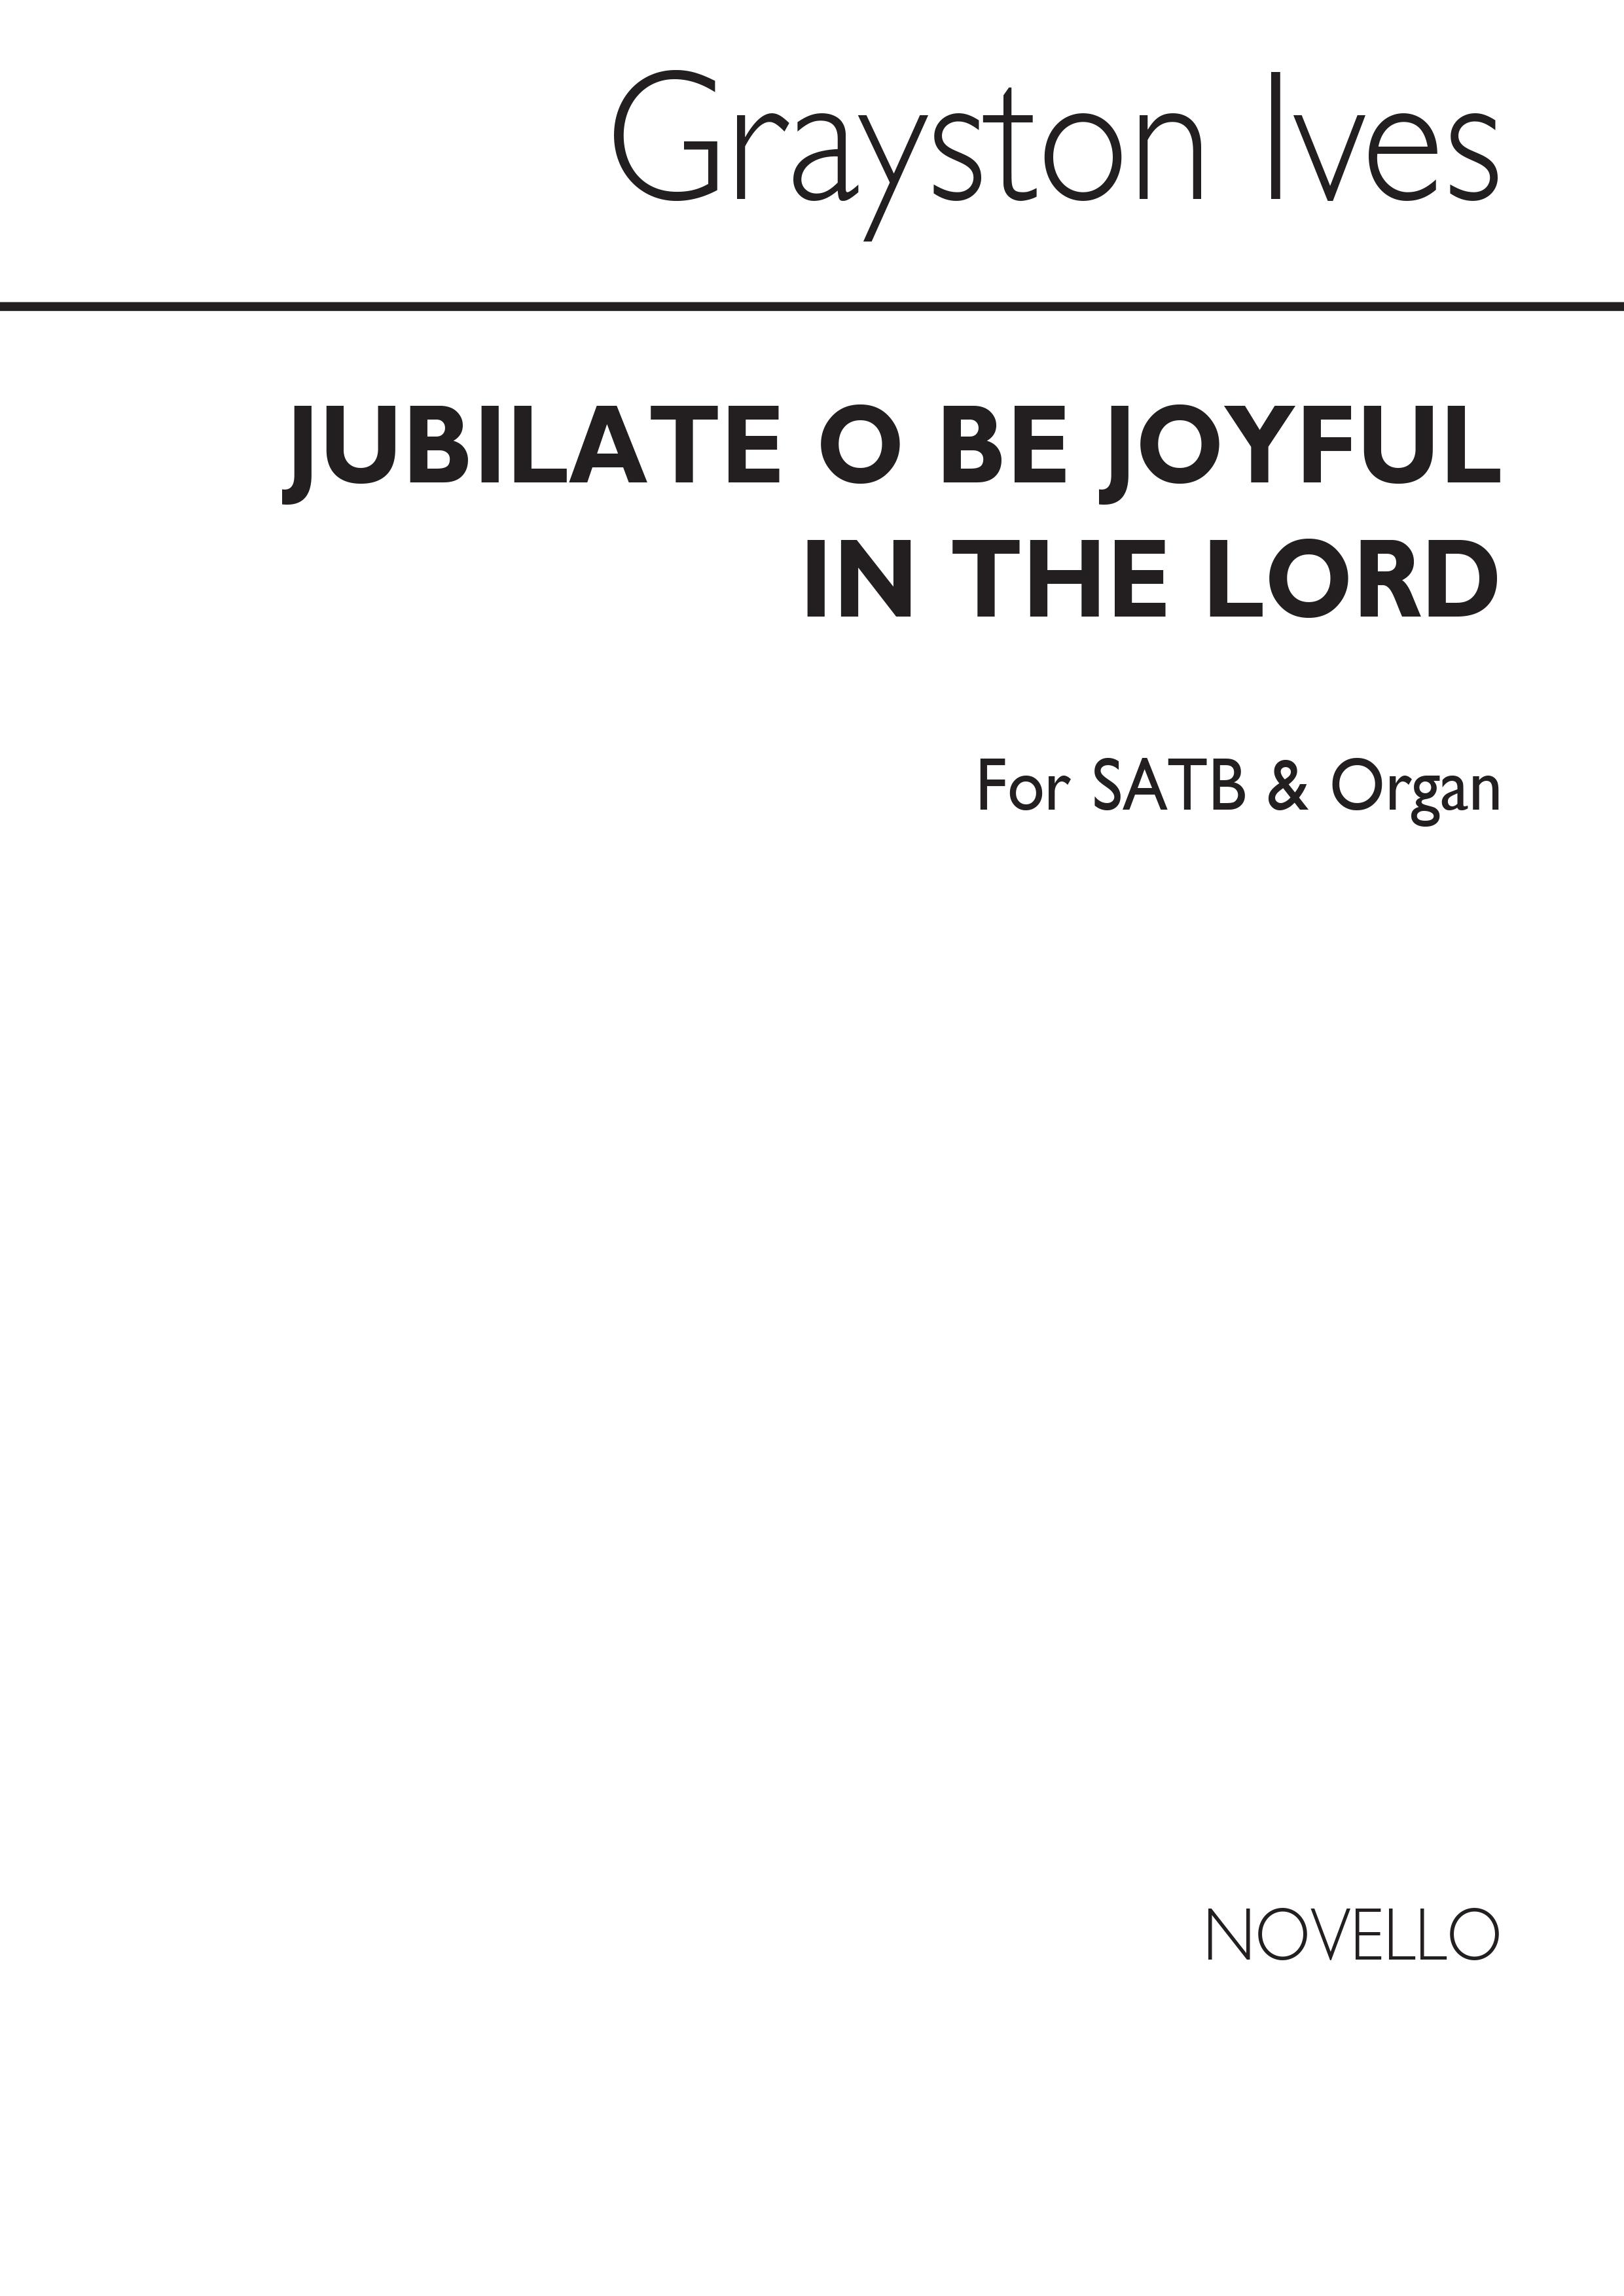 Grayston Ives: Jubilate Deo